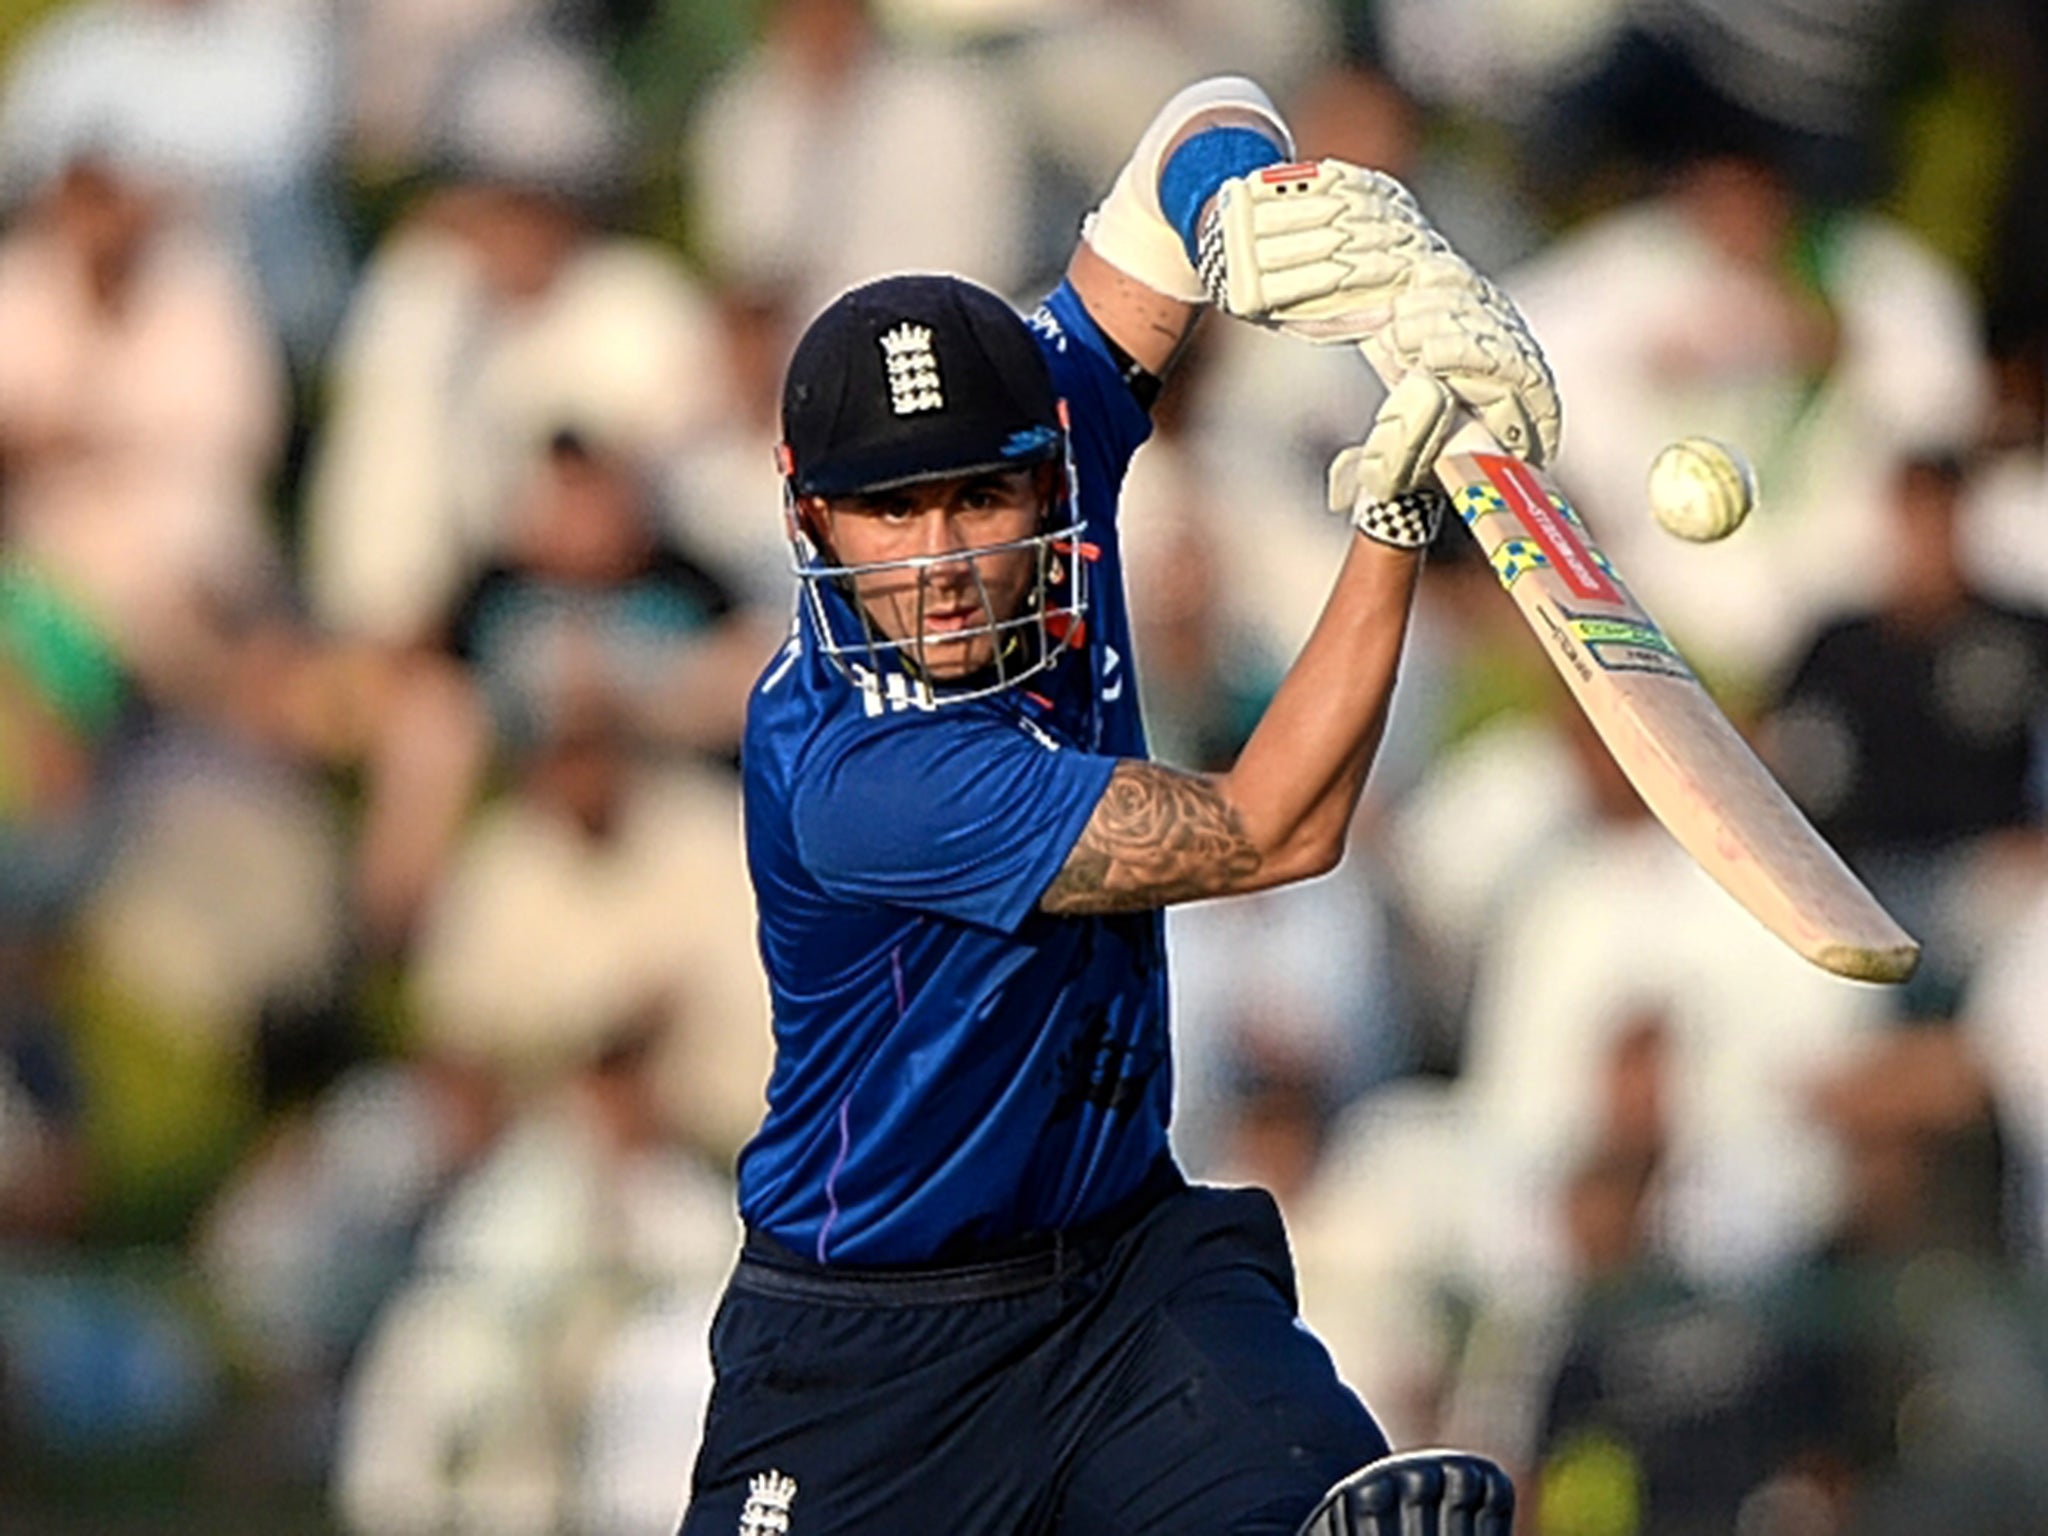 Alex Hales on his way to his first ODI century during England’s 95-run victory over Pakistan yesterday